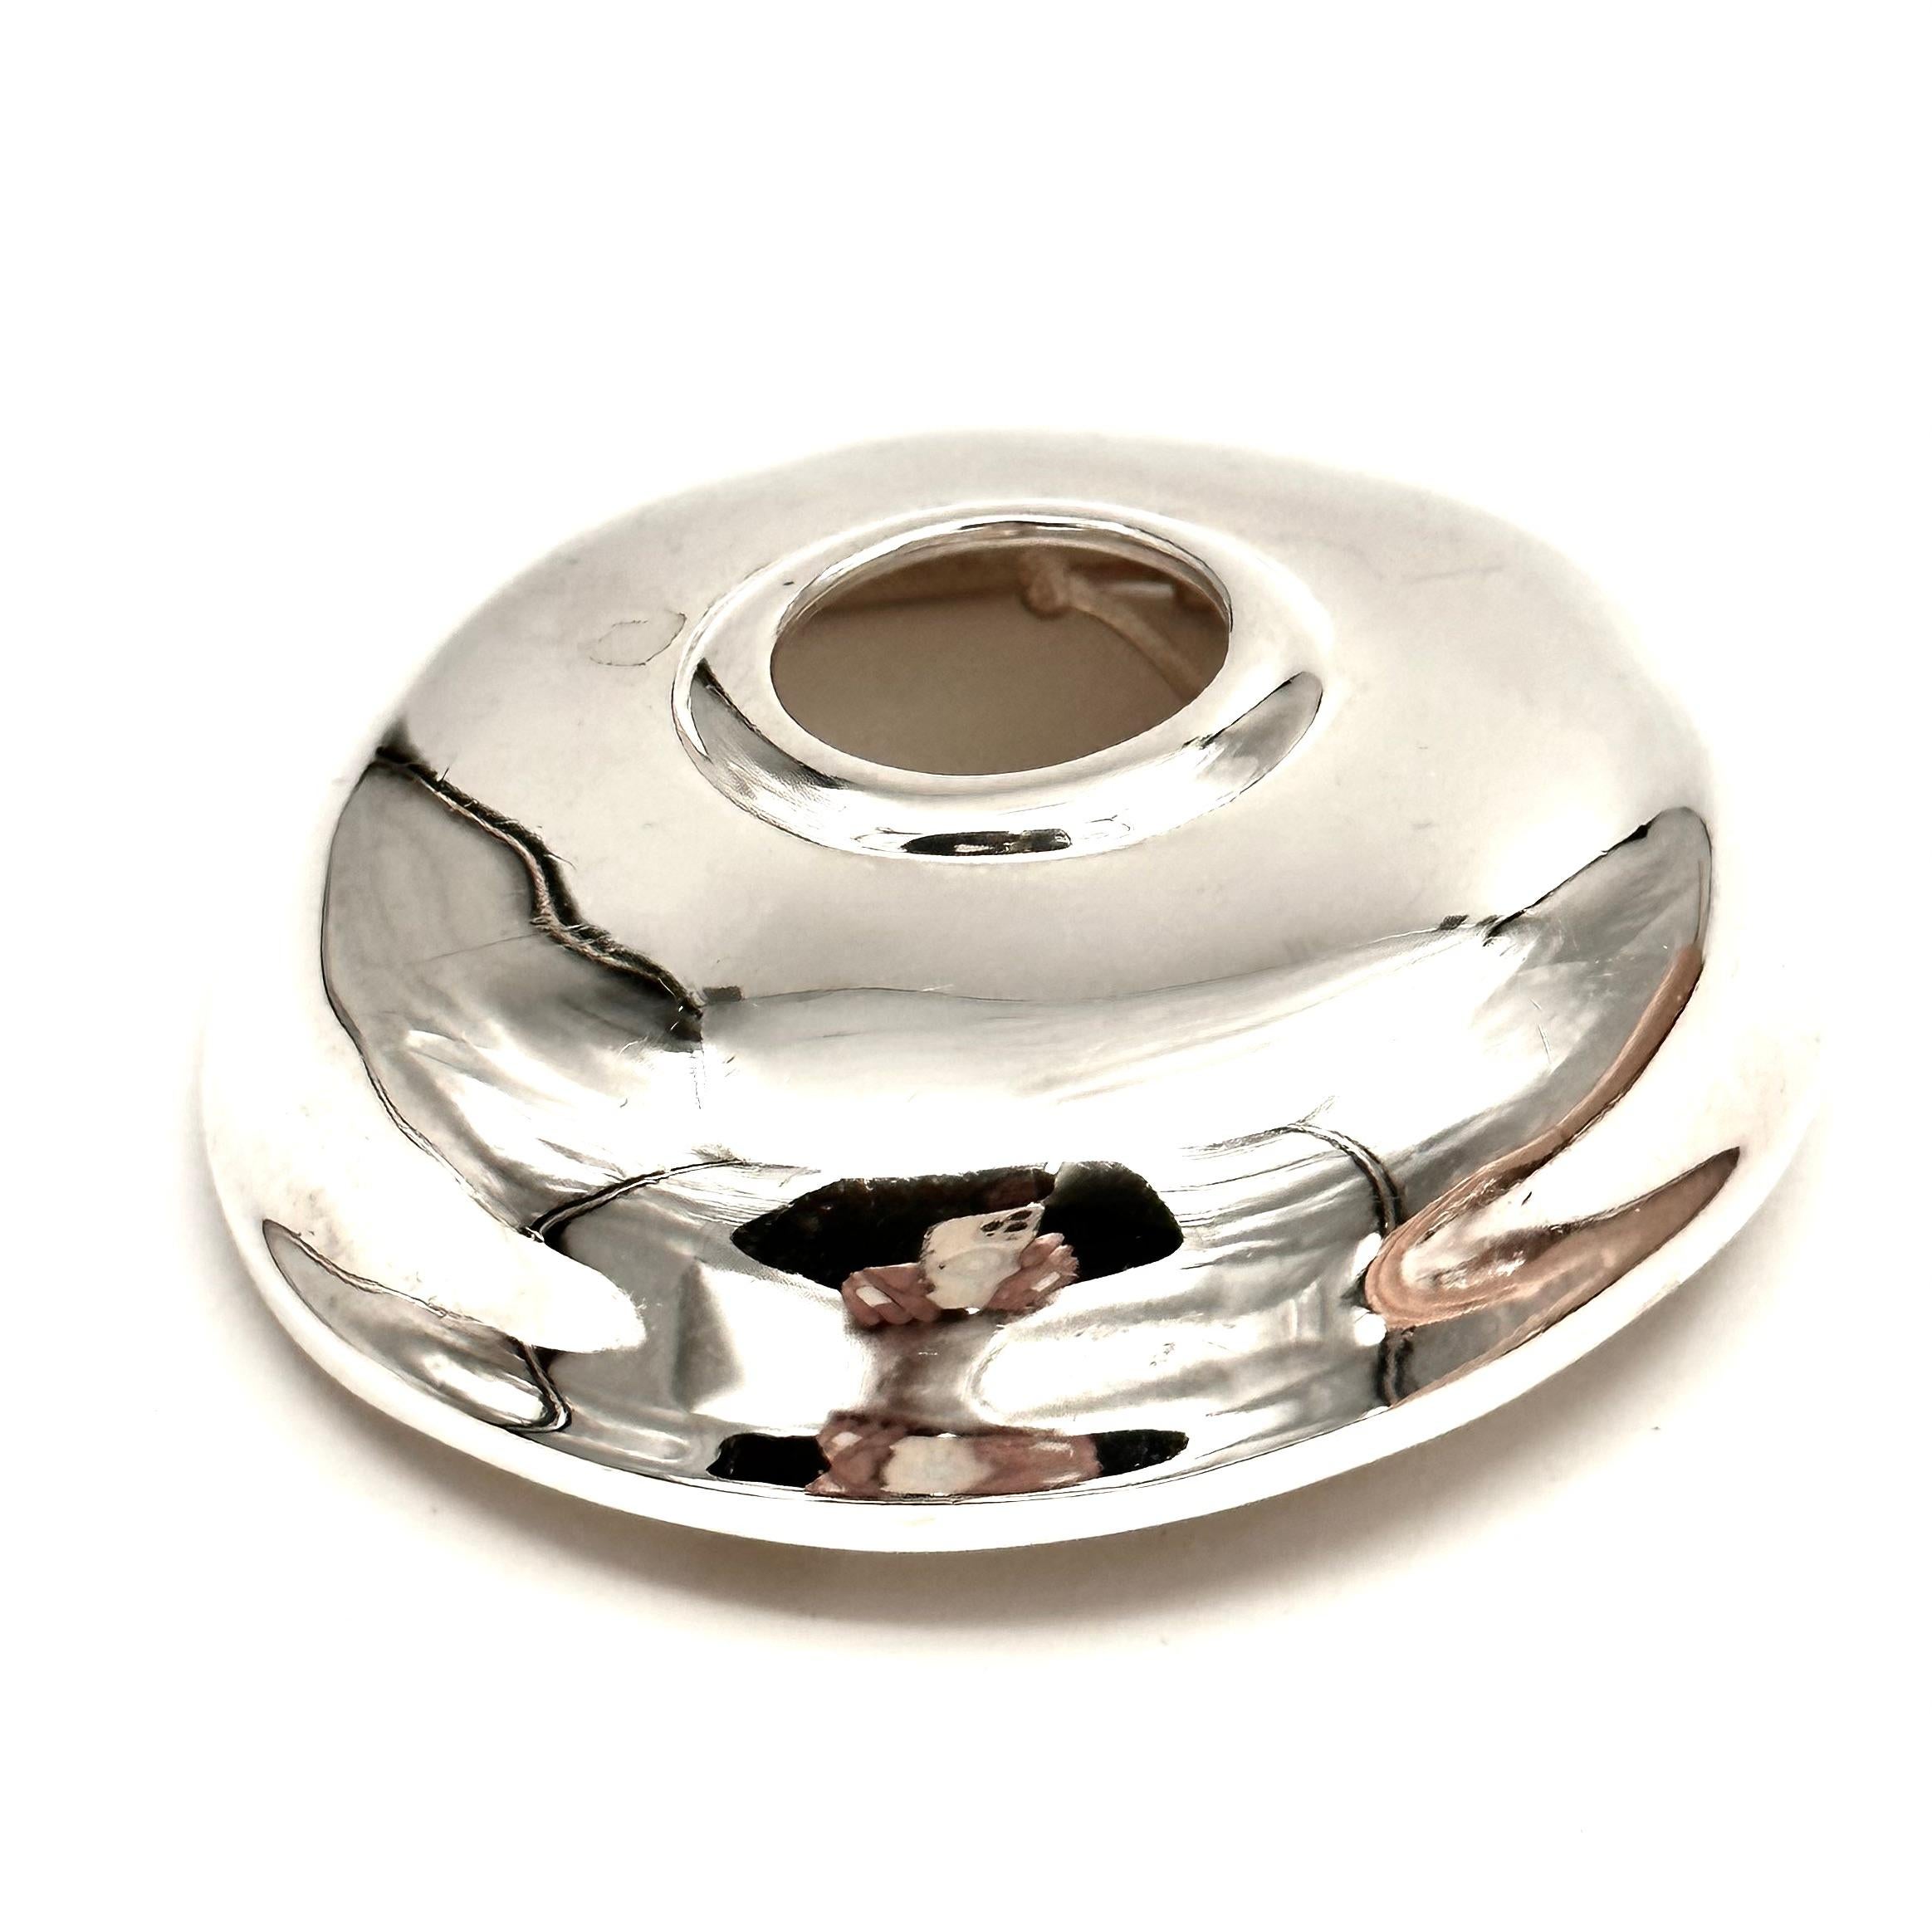 This bold and very sculptural brooch by robert Lee Morris is sterling silver, and is an actual dome that is nearly 3/4